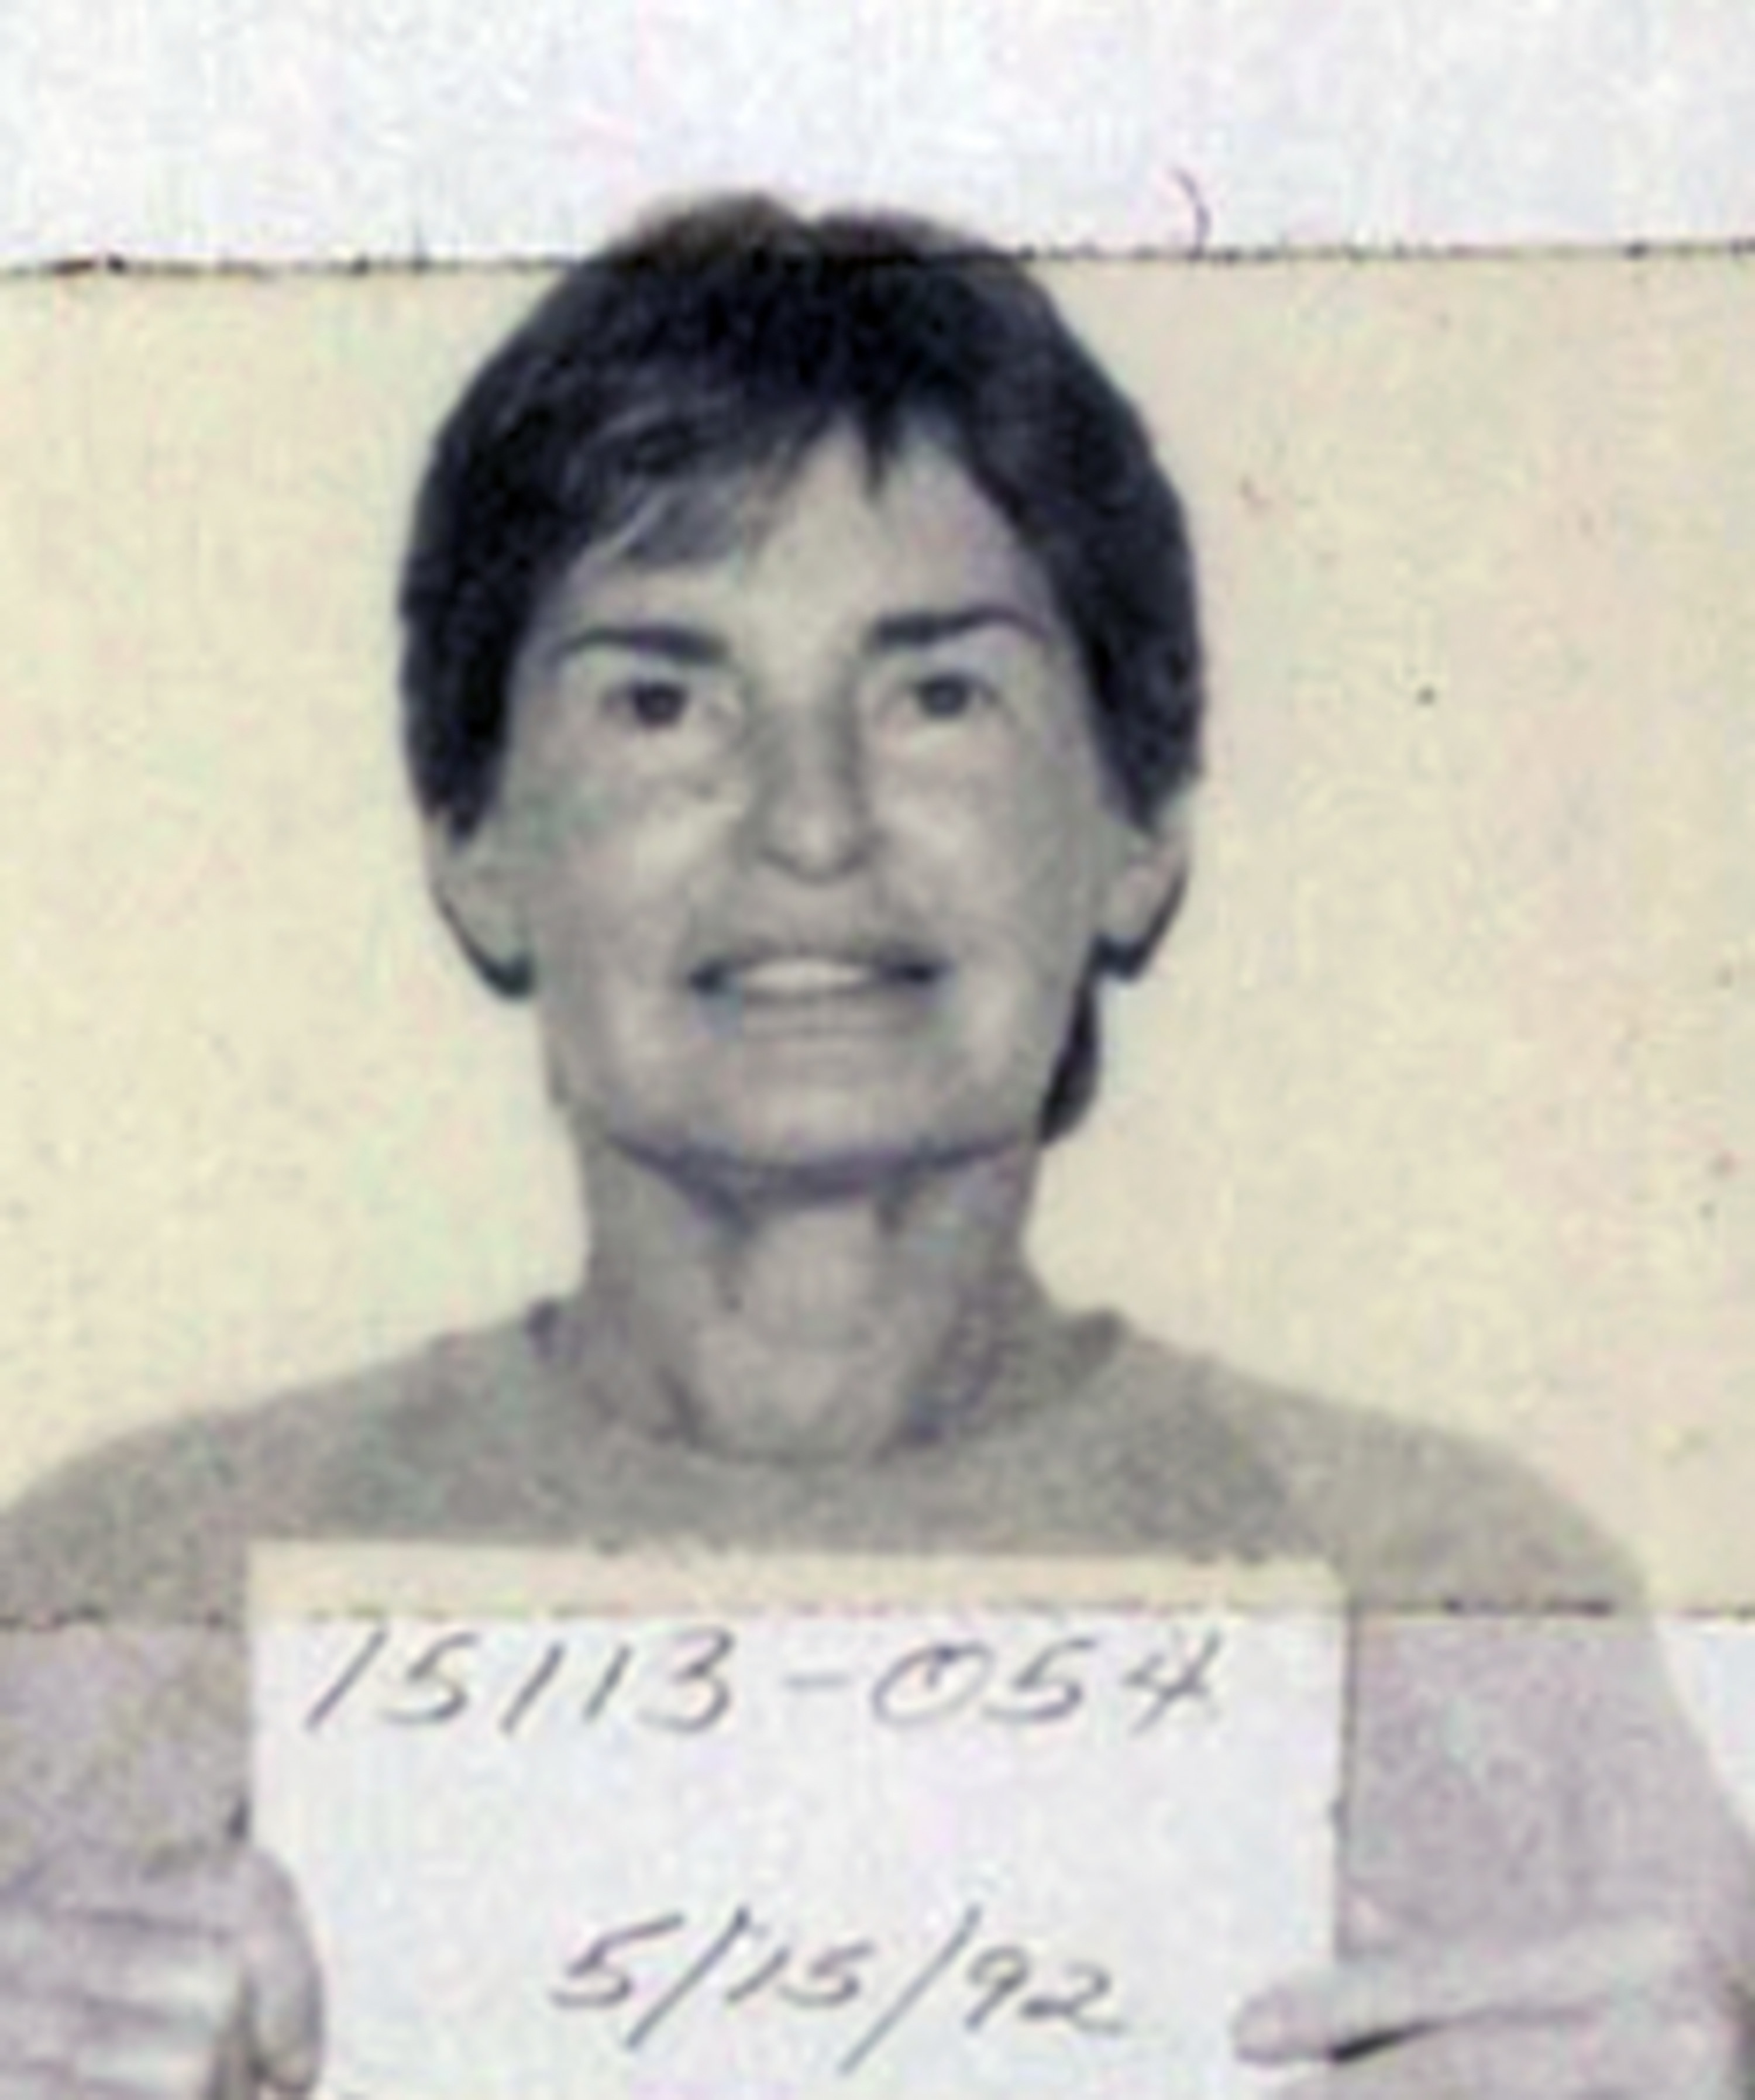 American businesswoman Leona Helmsley (1920–2007), at the start of her prison term for federal income tax evasion, May 15, 1992